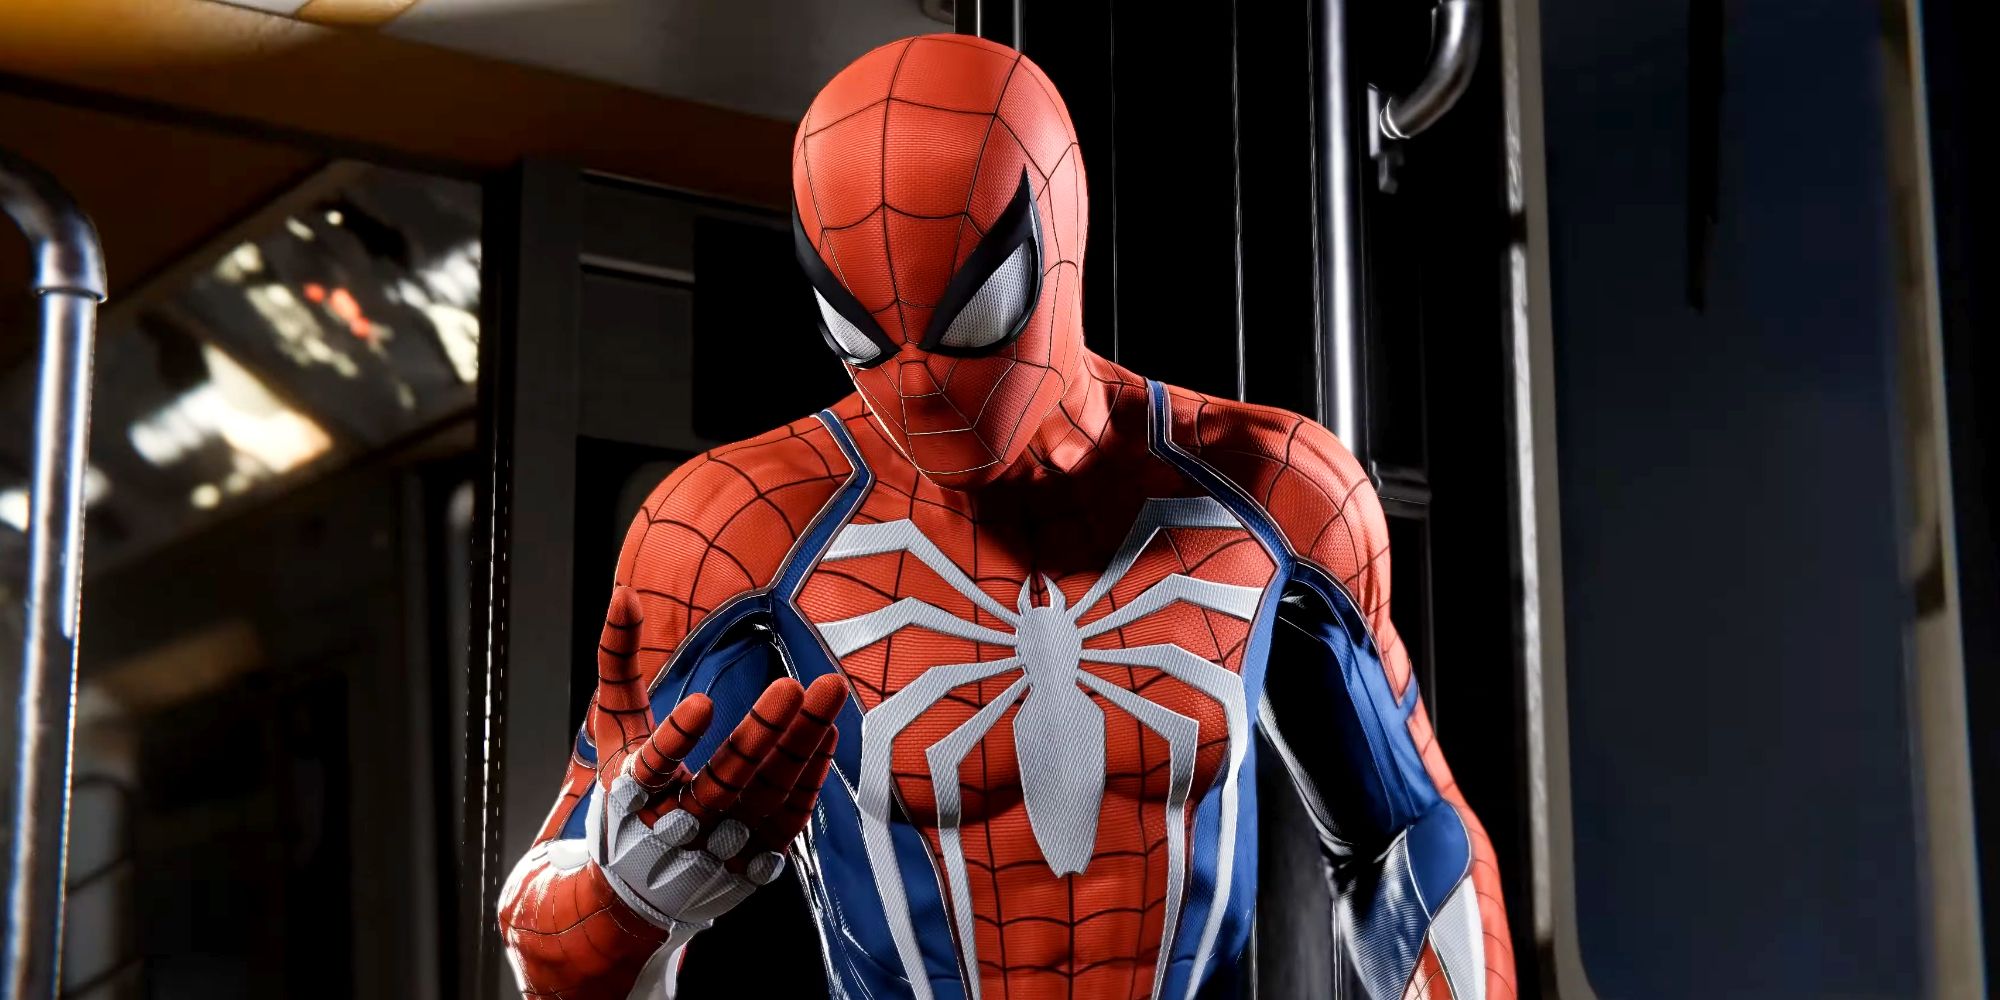 Spider-Man looking at his hand while riding the subway in Marvel's Spider-Man Remastered